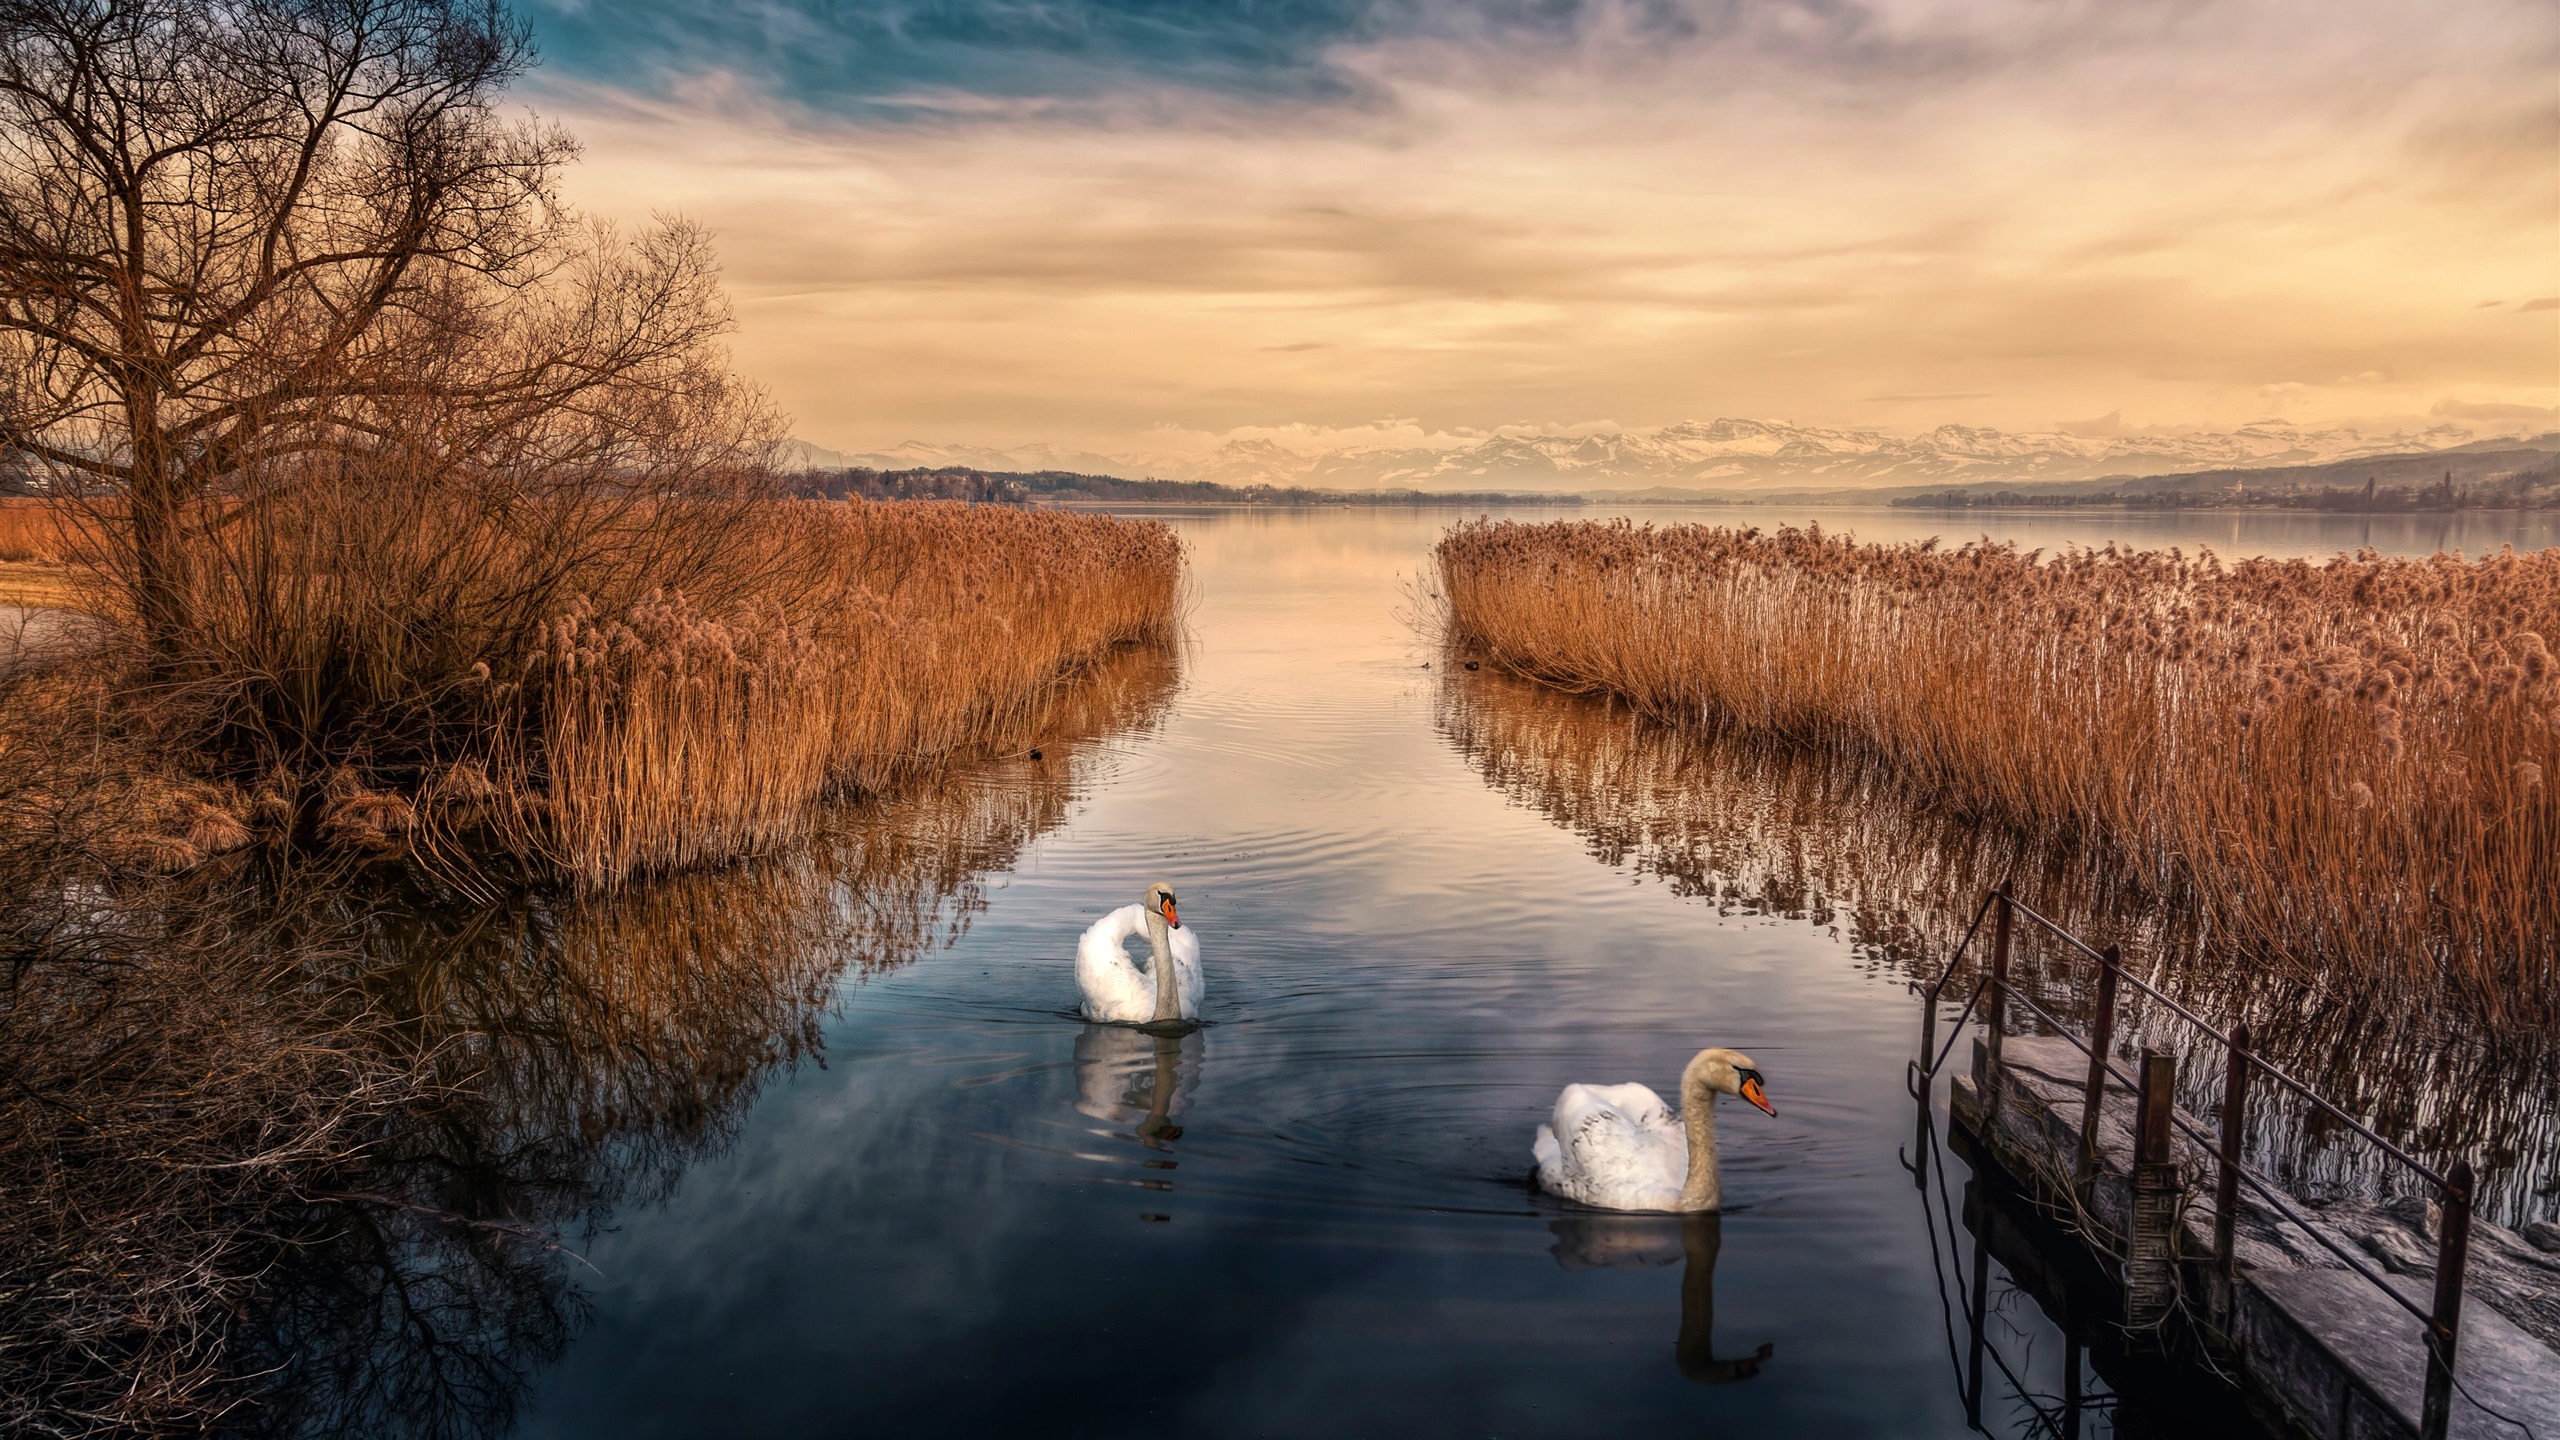 General 2560x1440 swans animals lake plants nature clouds landscape reeds water